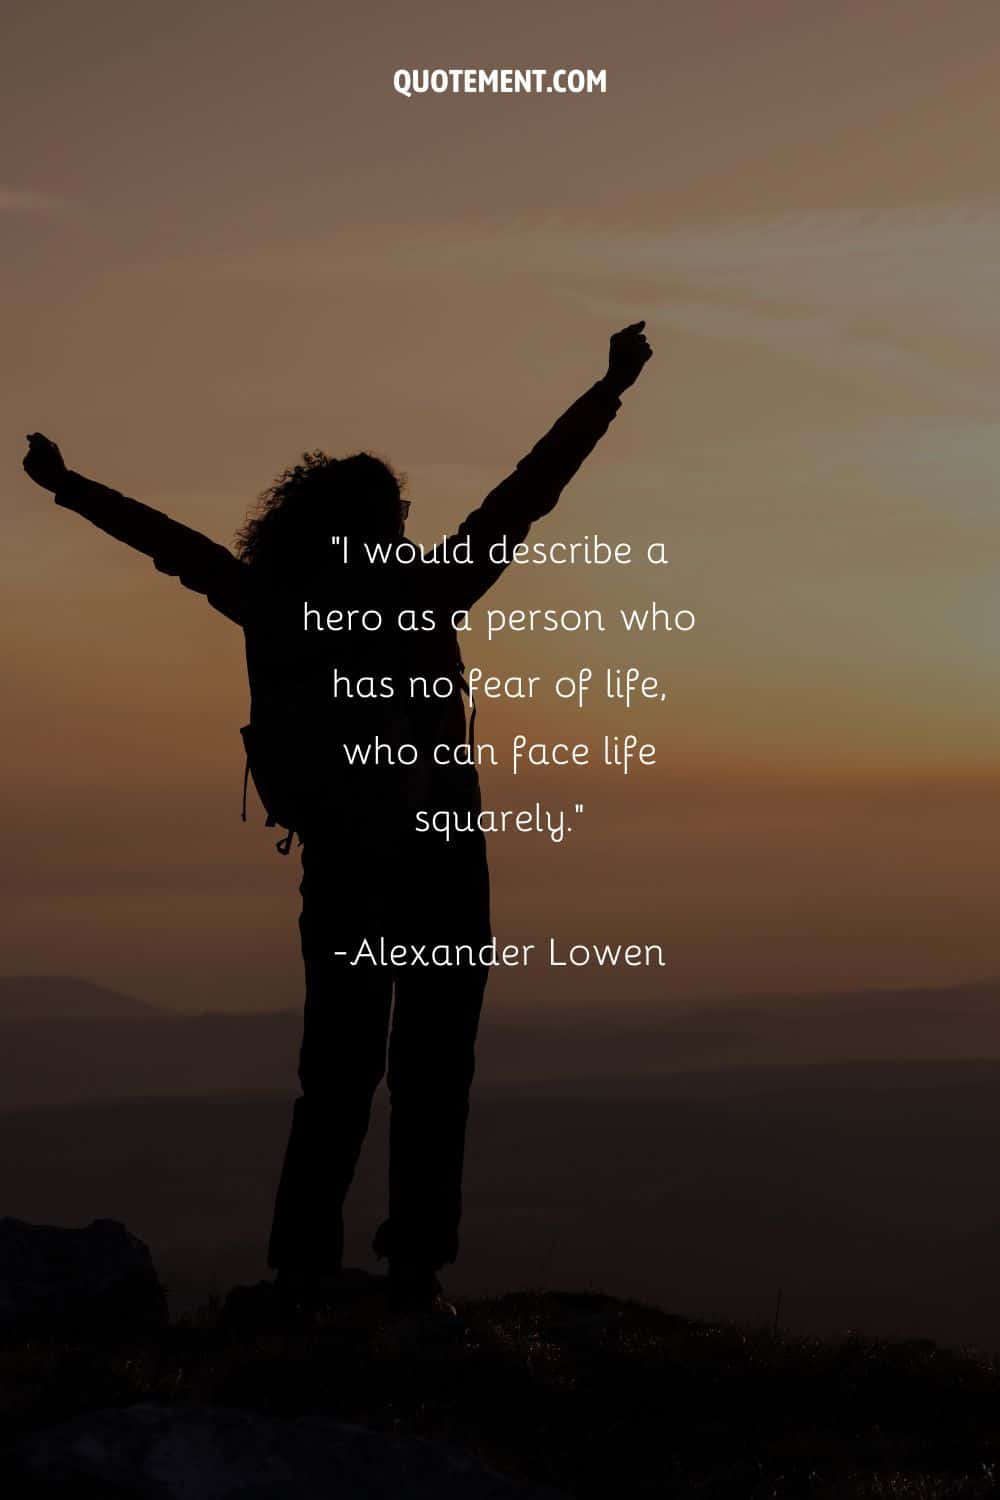 a girl with raised hands representing quote about unfearful hero